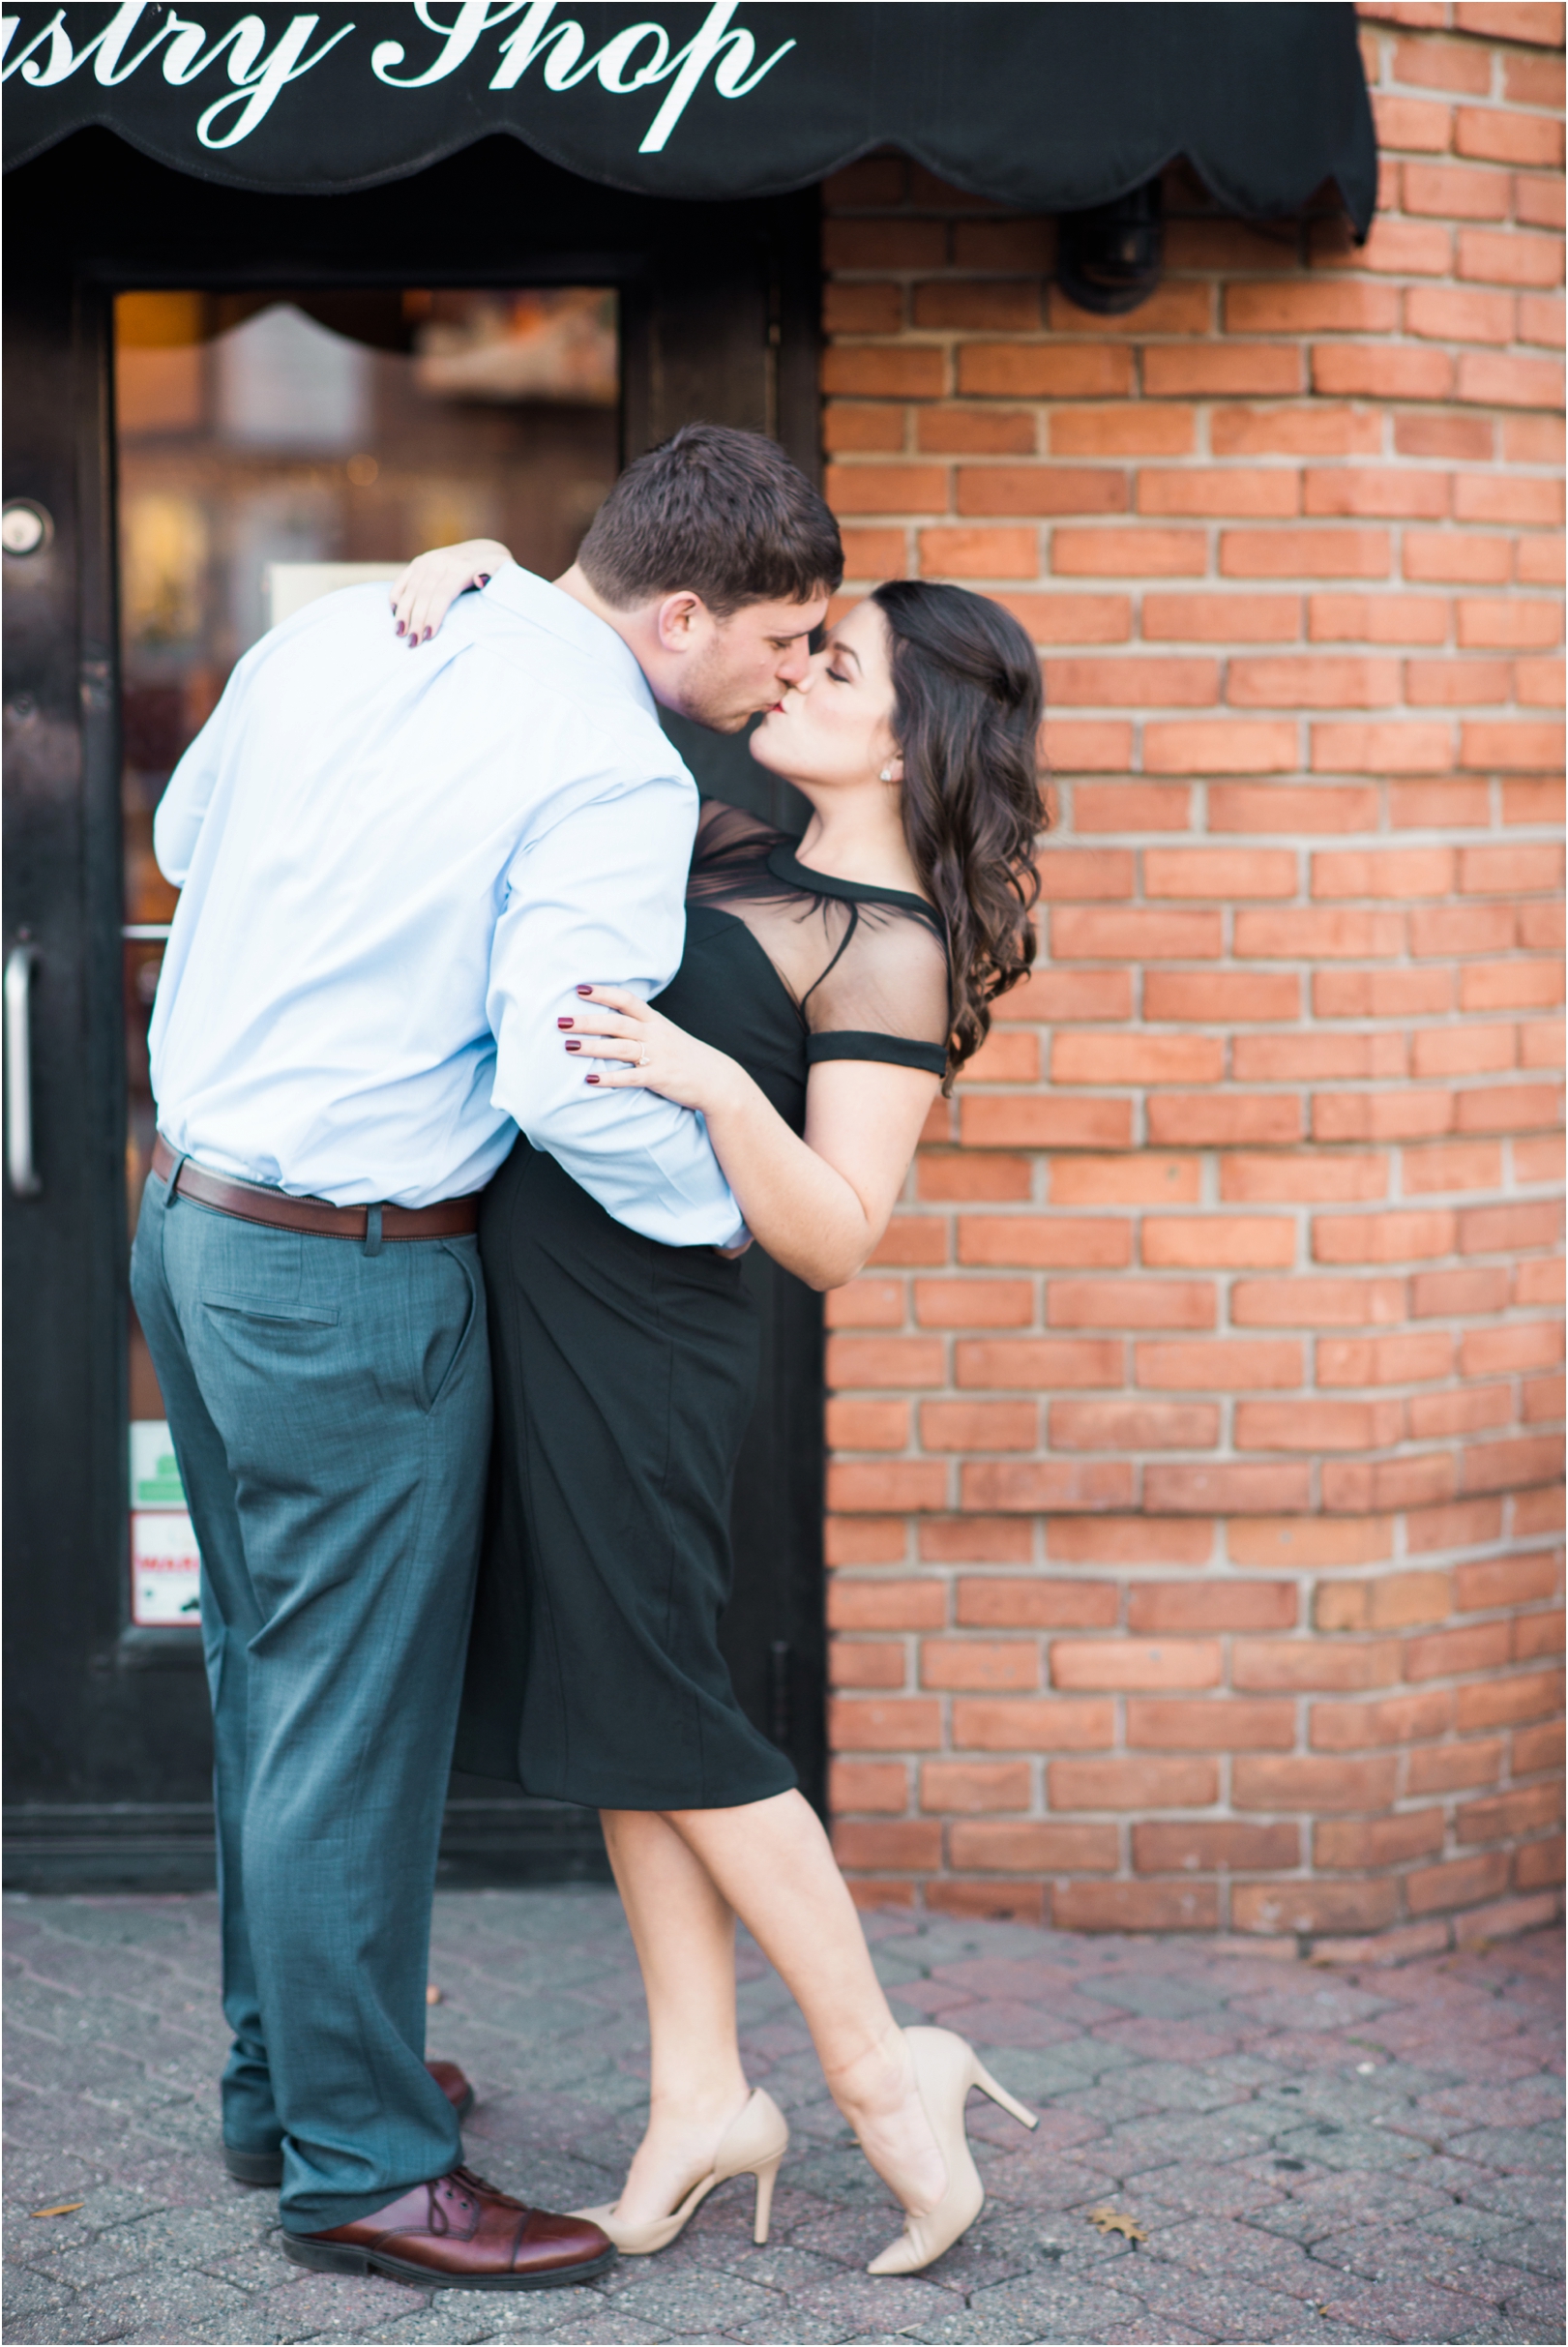 Italian cafe themed engagement pictures in baltimore 